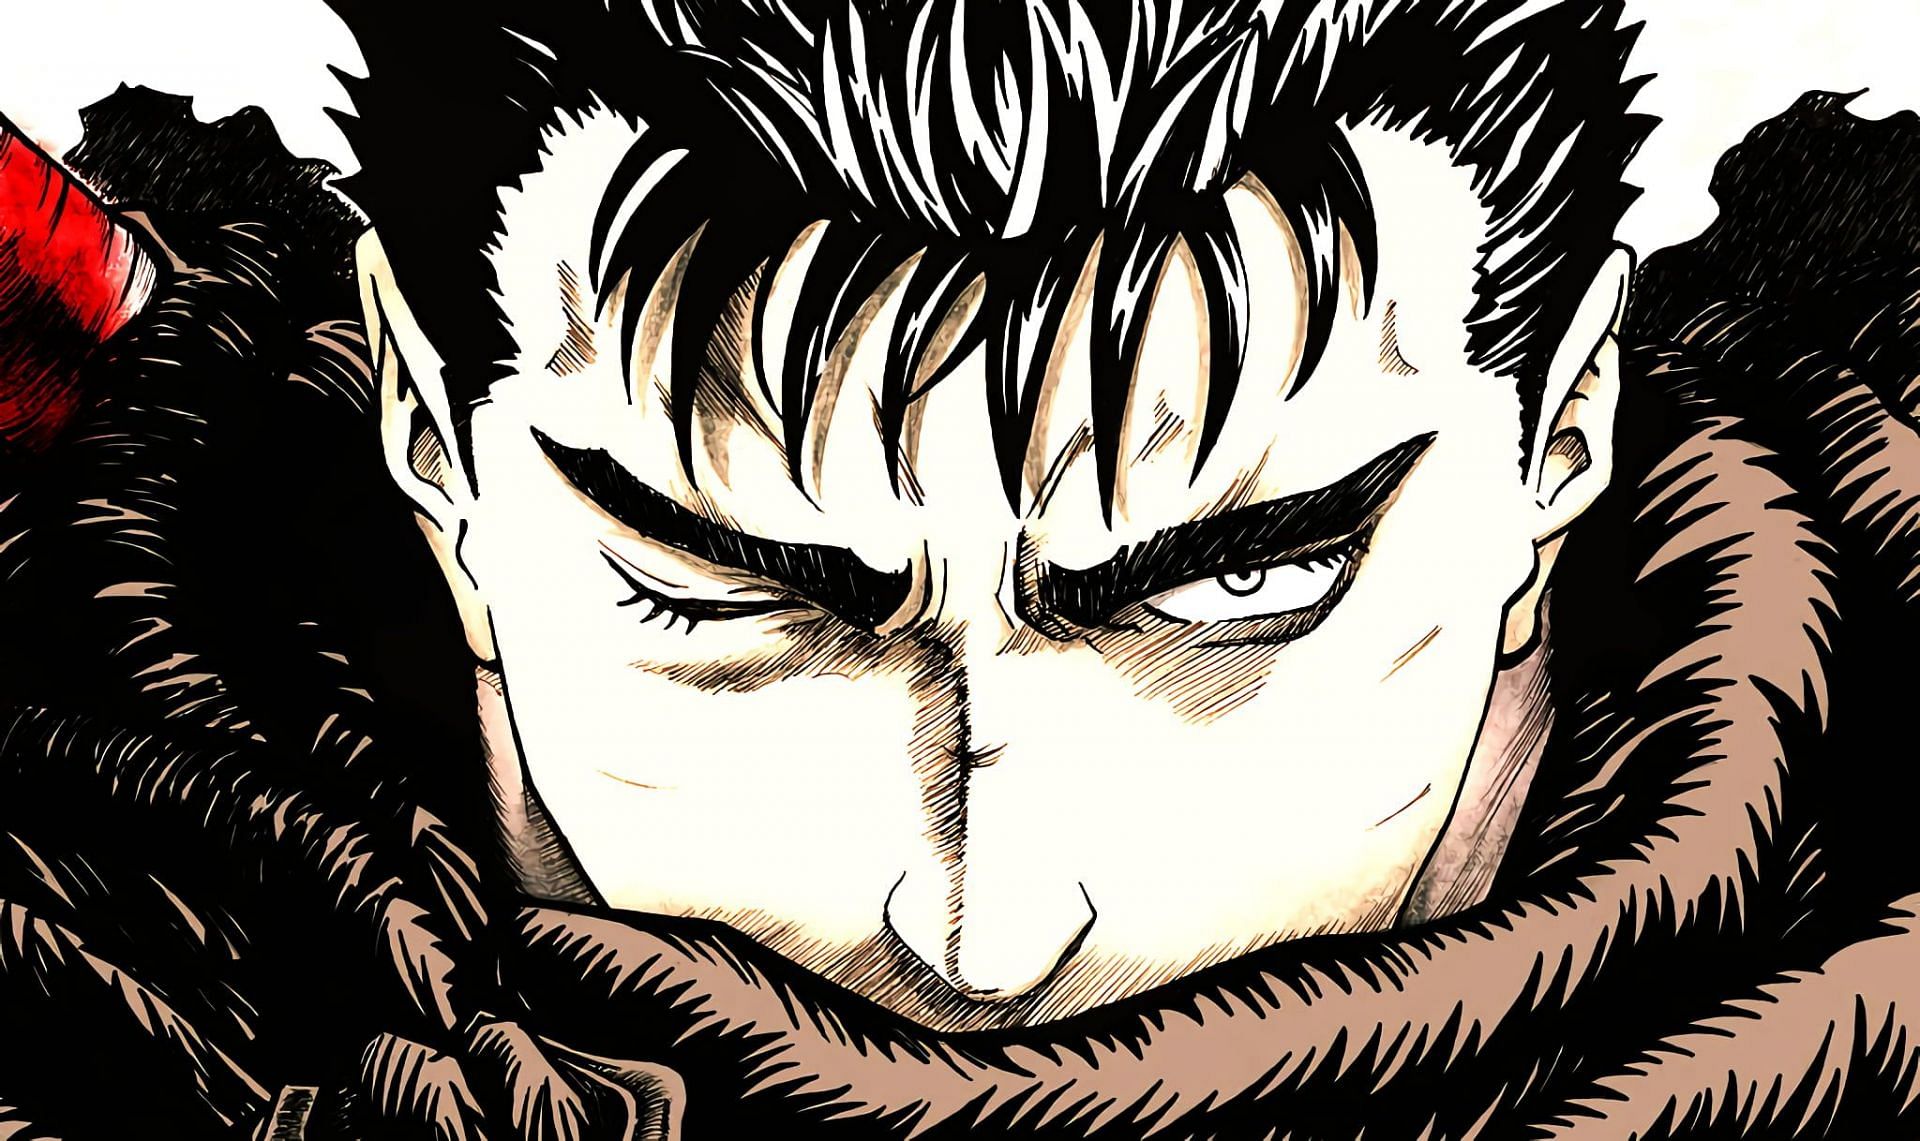 Guts are the most robust character in Berserk (Image via Gemba)